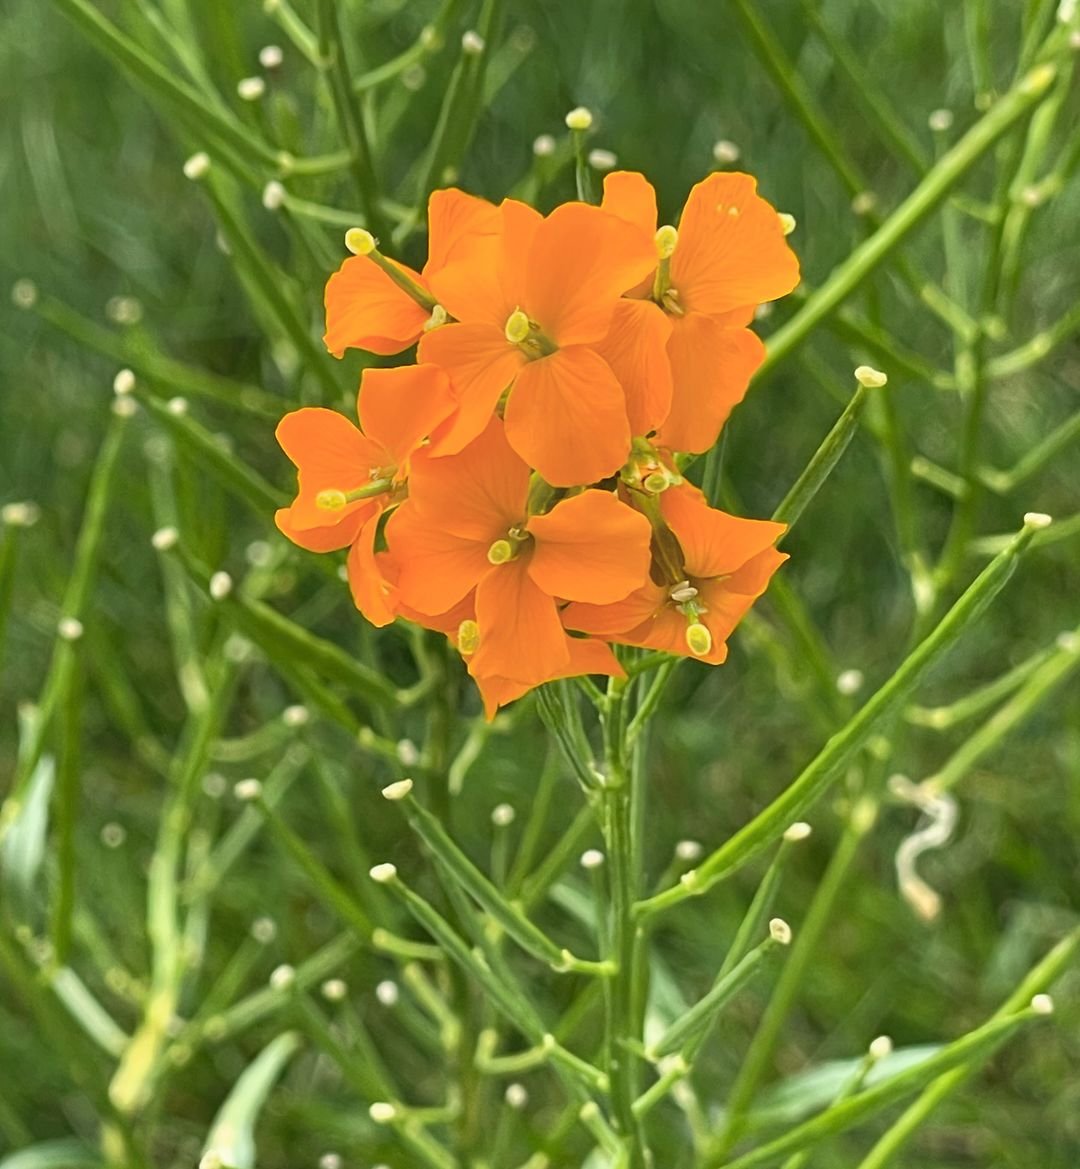 A vibrant orange Wallflower blossom stands tall amidst the lush green grass.

